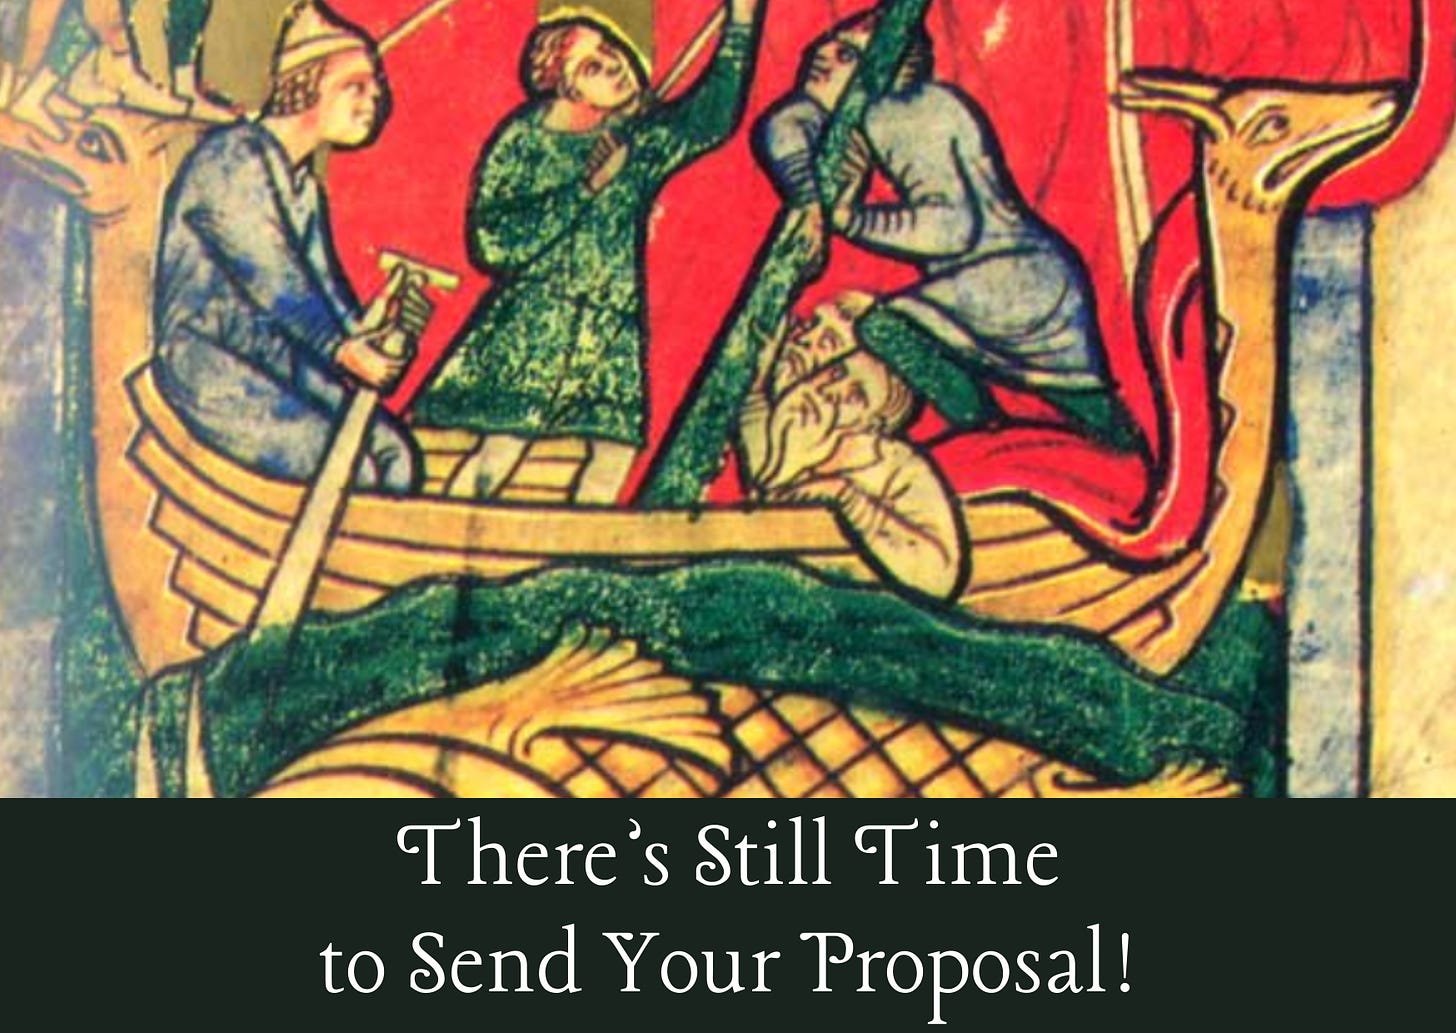 Image from illuminated manuscript with the words there's still time to send your proposal